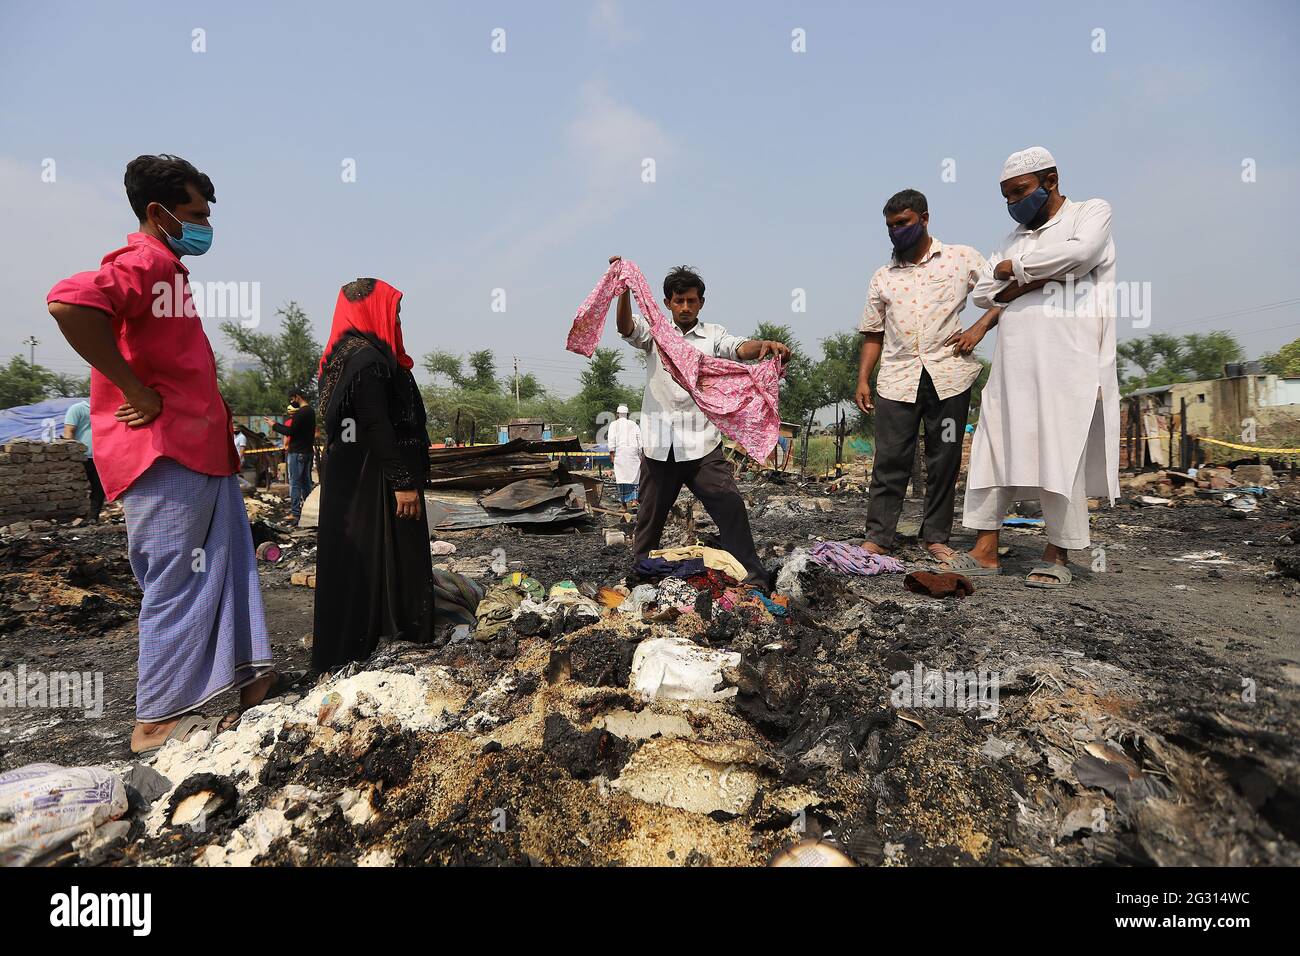 New Delhi, India. 13th June, 2021. Rohingya refugees look around in the charred remains of their camp, during the aftermath. A fire incident broke out at the Rohingya refugee camp leaving over 50 shanties of Rohingya refugees gutted. The cause of the fire has not yet been established. Credit: SOPA Images Limited/Alamy Live News Stock Photo